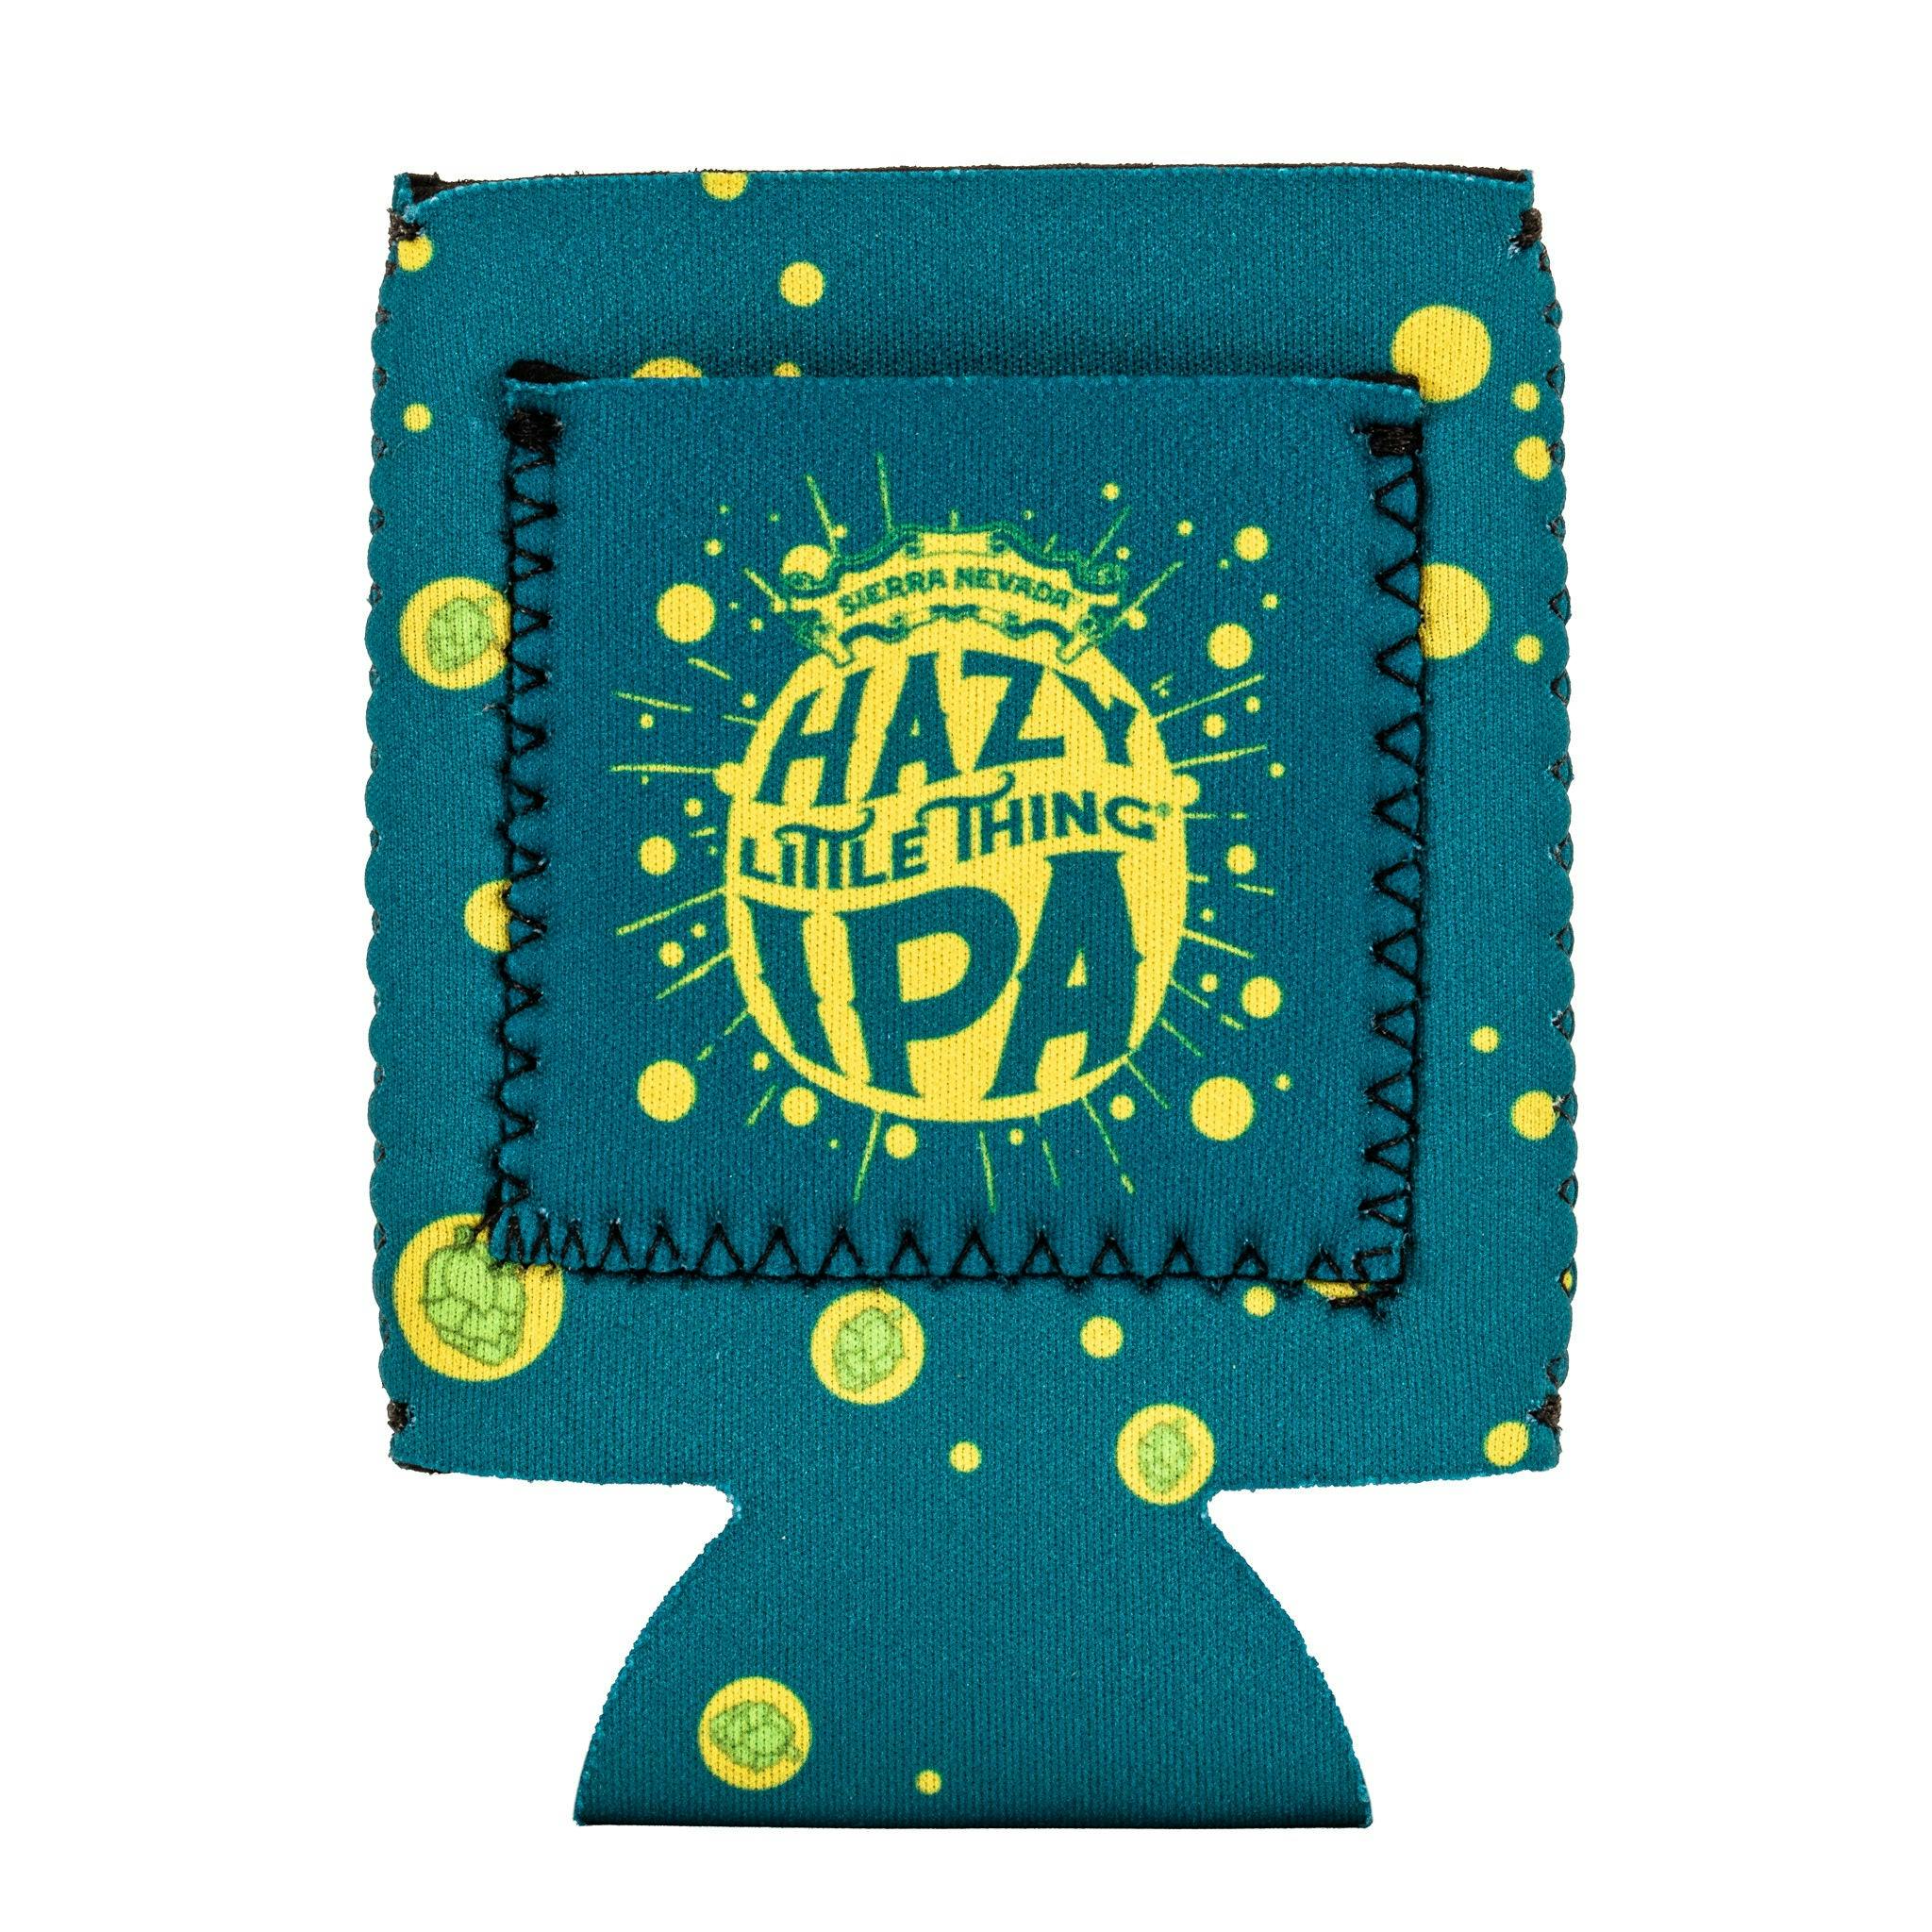 Hazy Little Thing Stash Pocket Beer Holder - shown empty and laying flat